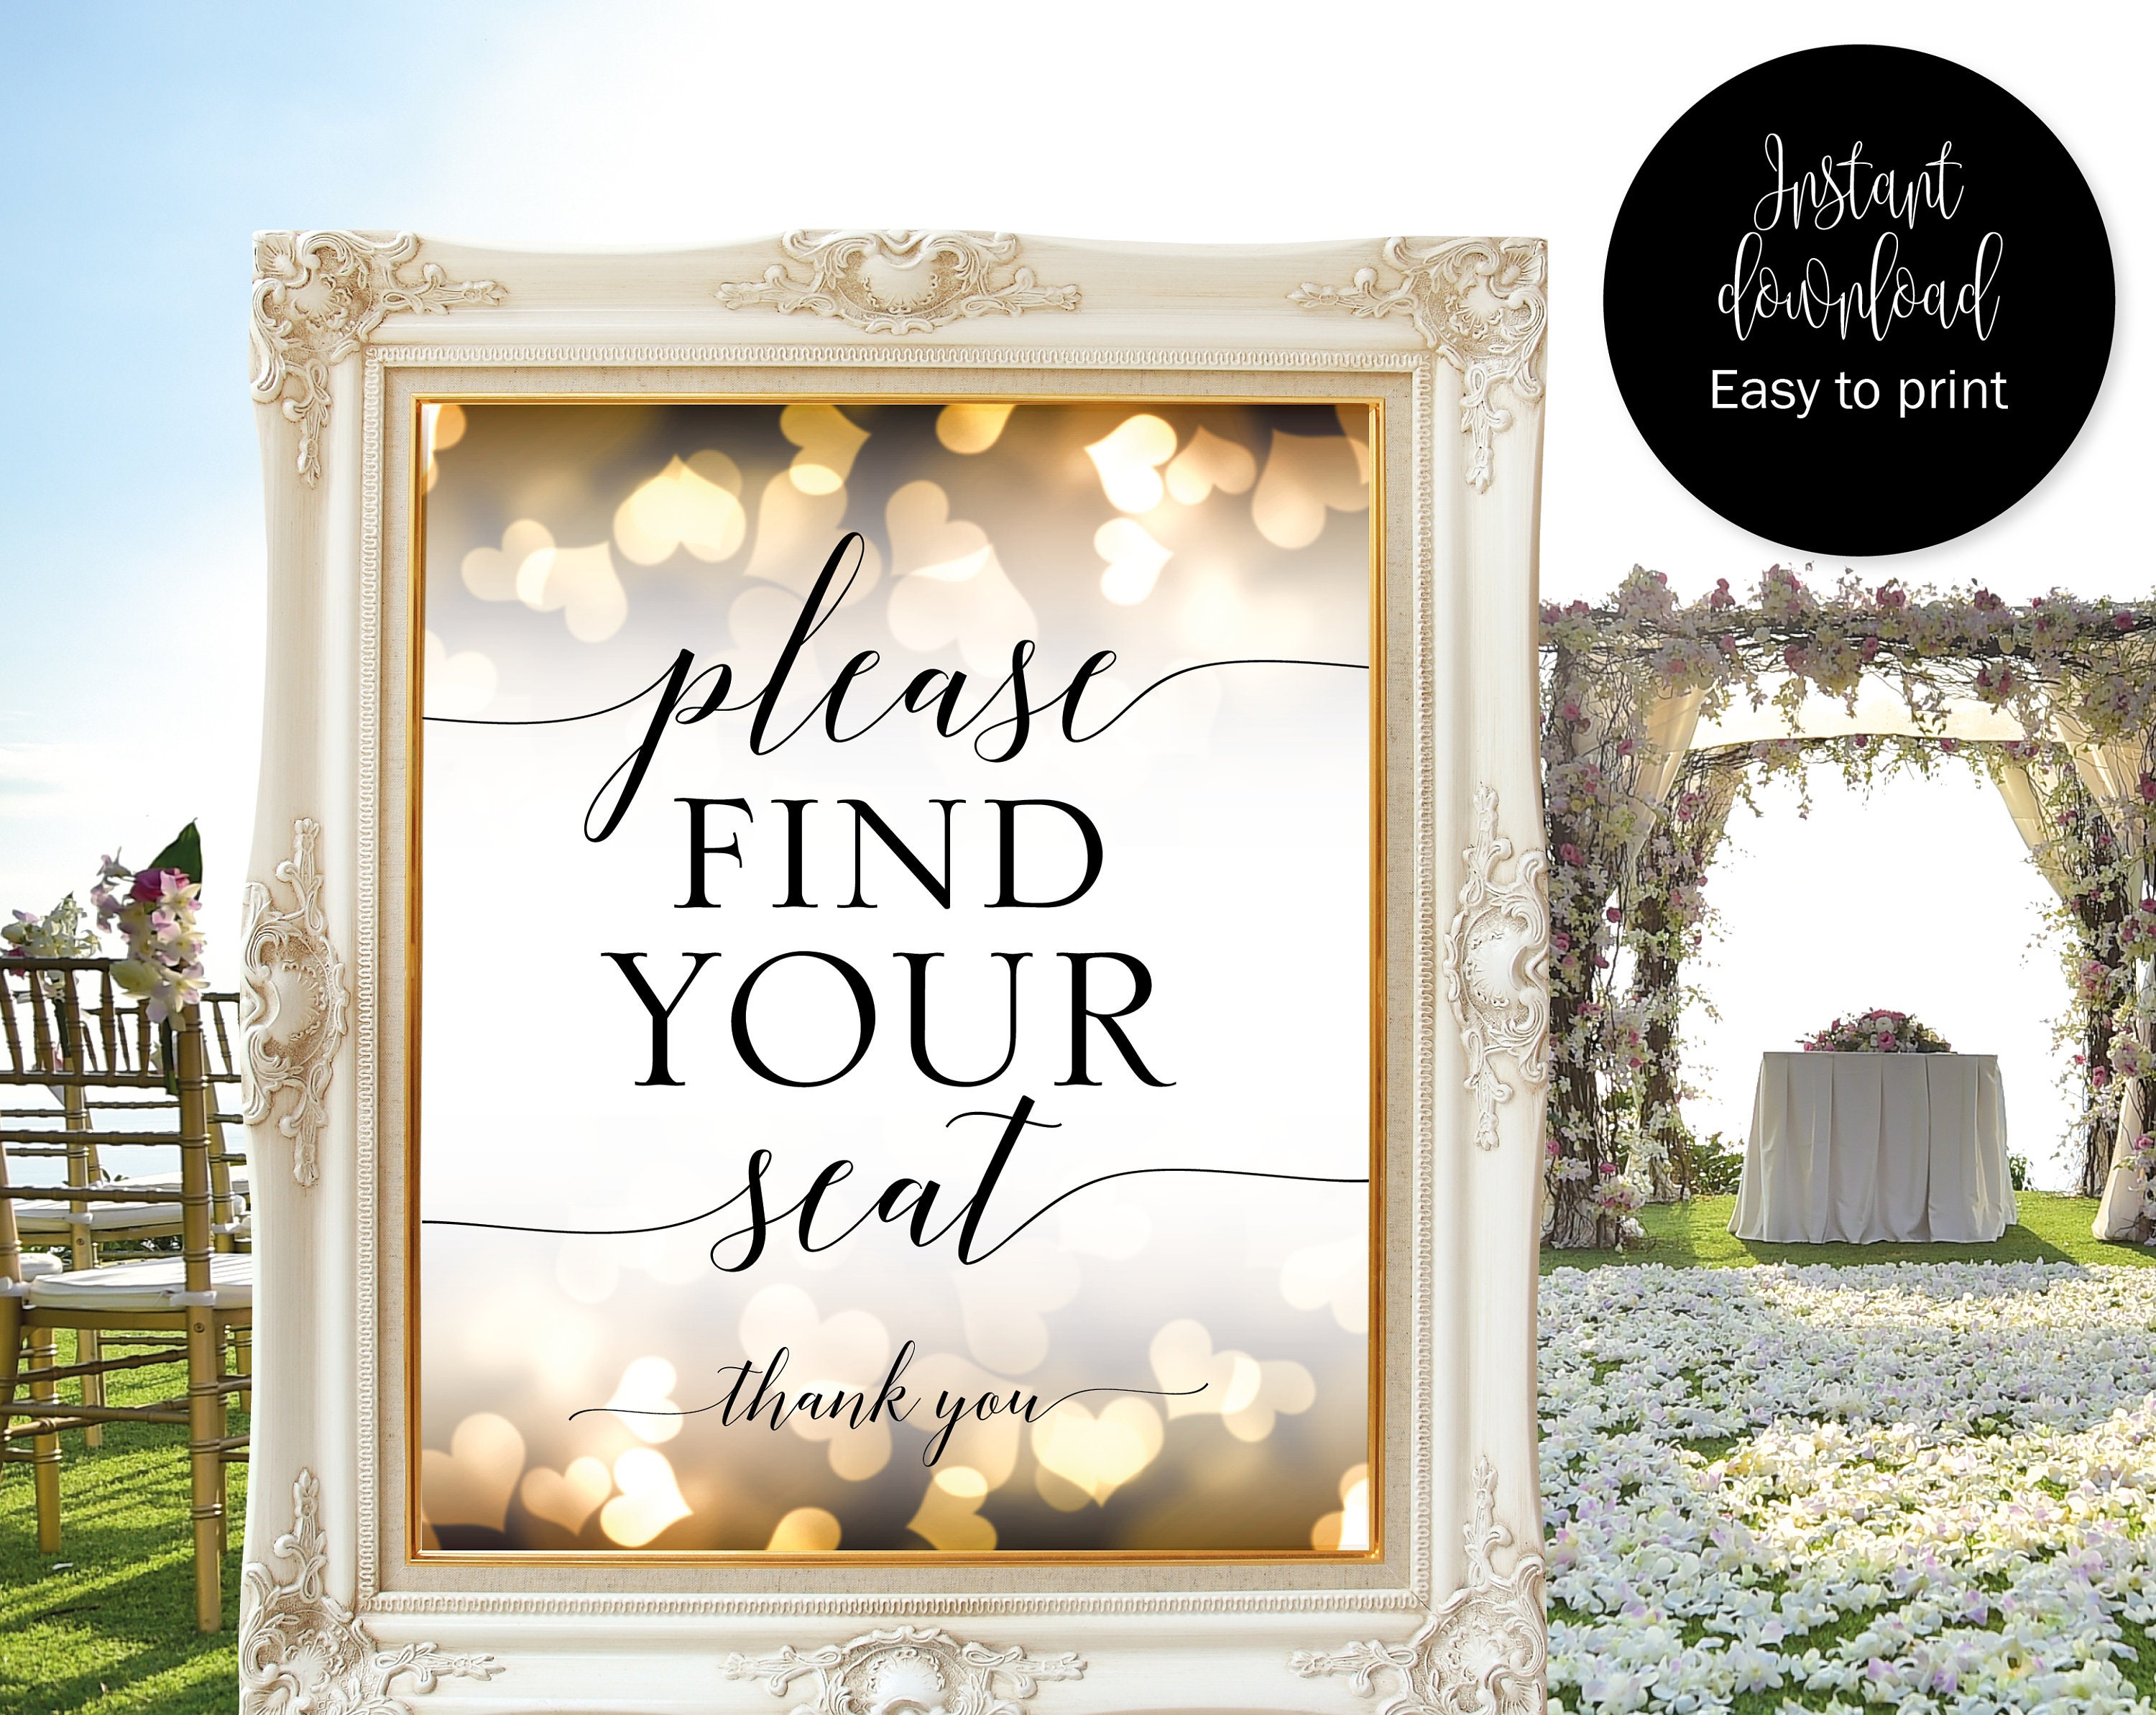 Find Your Seat, Wedding Seat Sign, Find Your Seat Sign, Please Find Yo – AS  Pretty Paperie